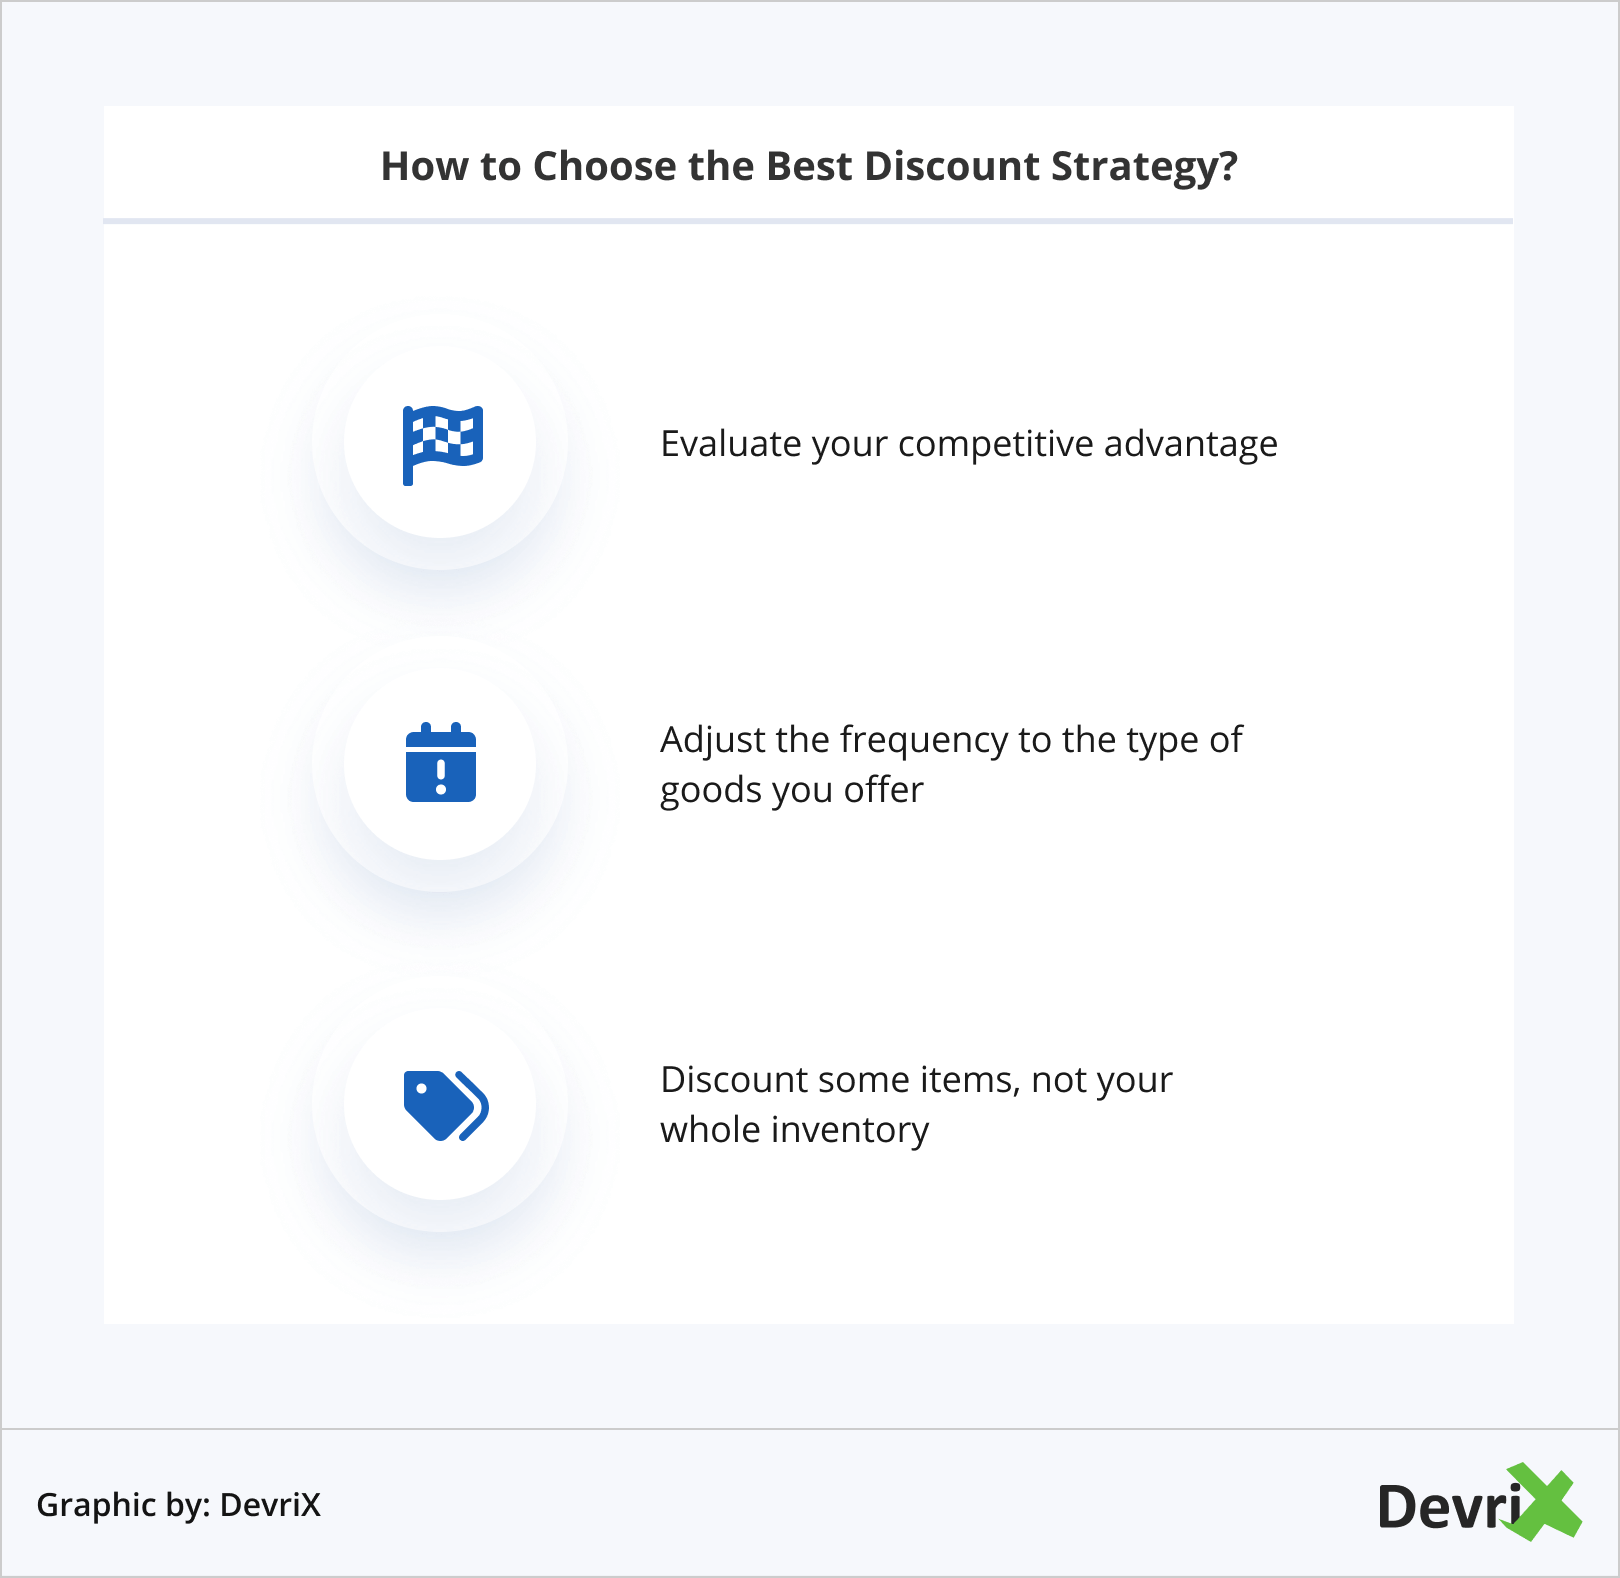 How to Choose the Best Discount Strategy_